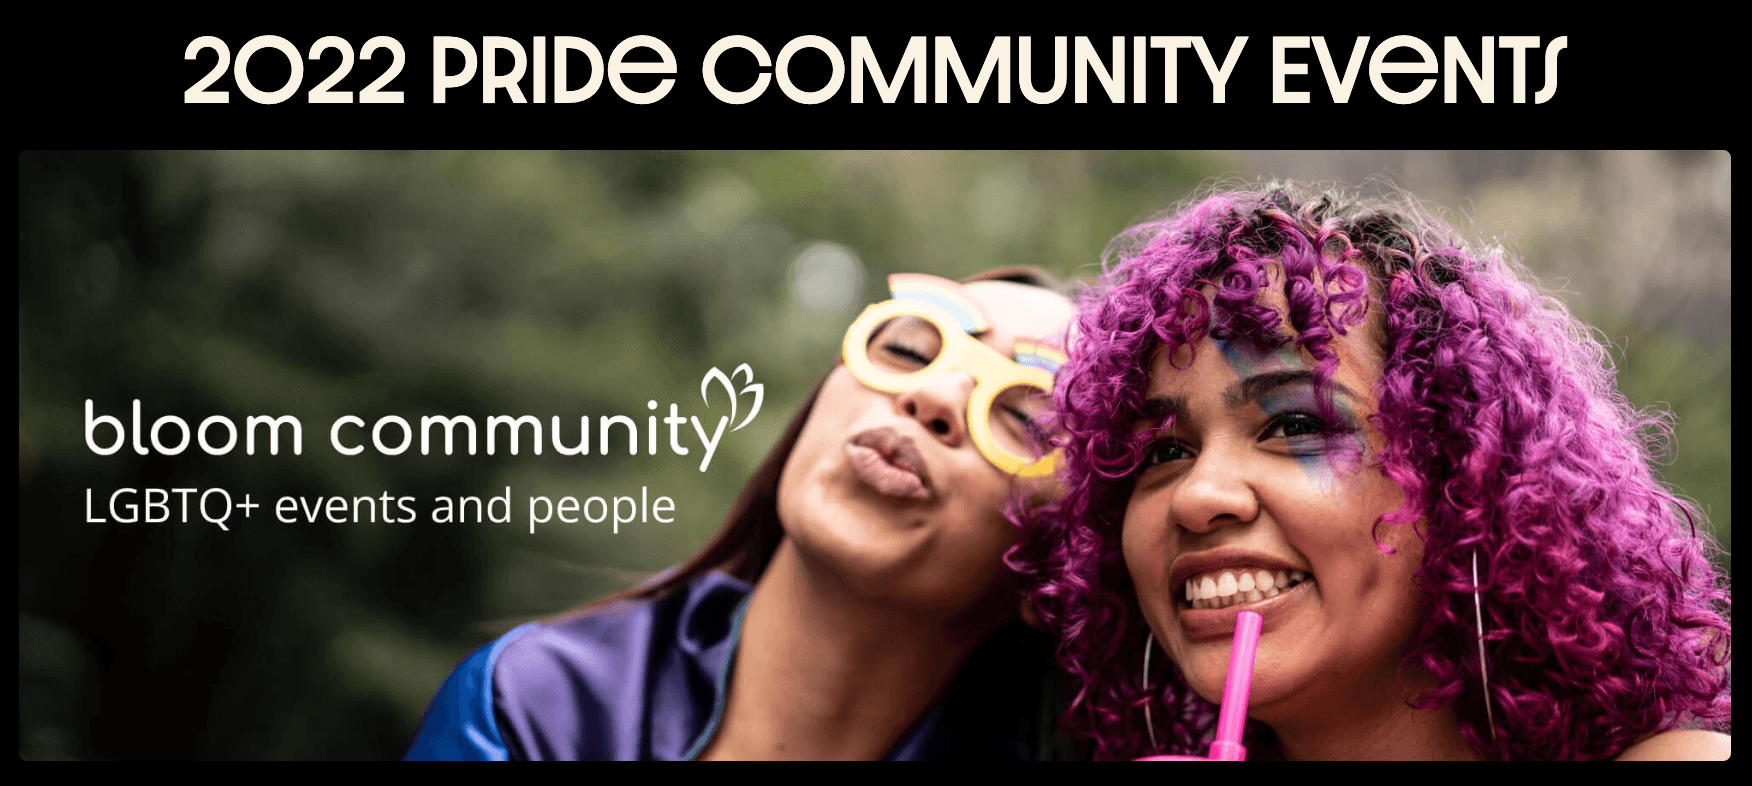 2022 Pride Community Events Banner